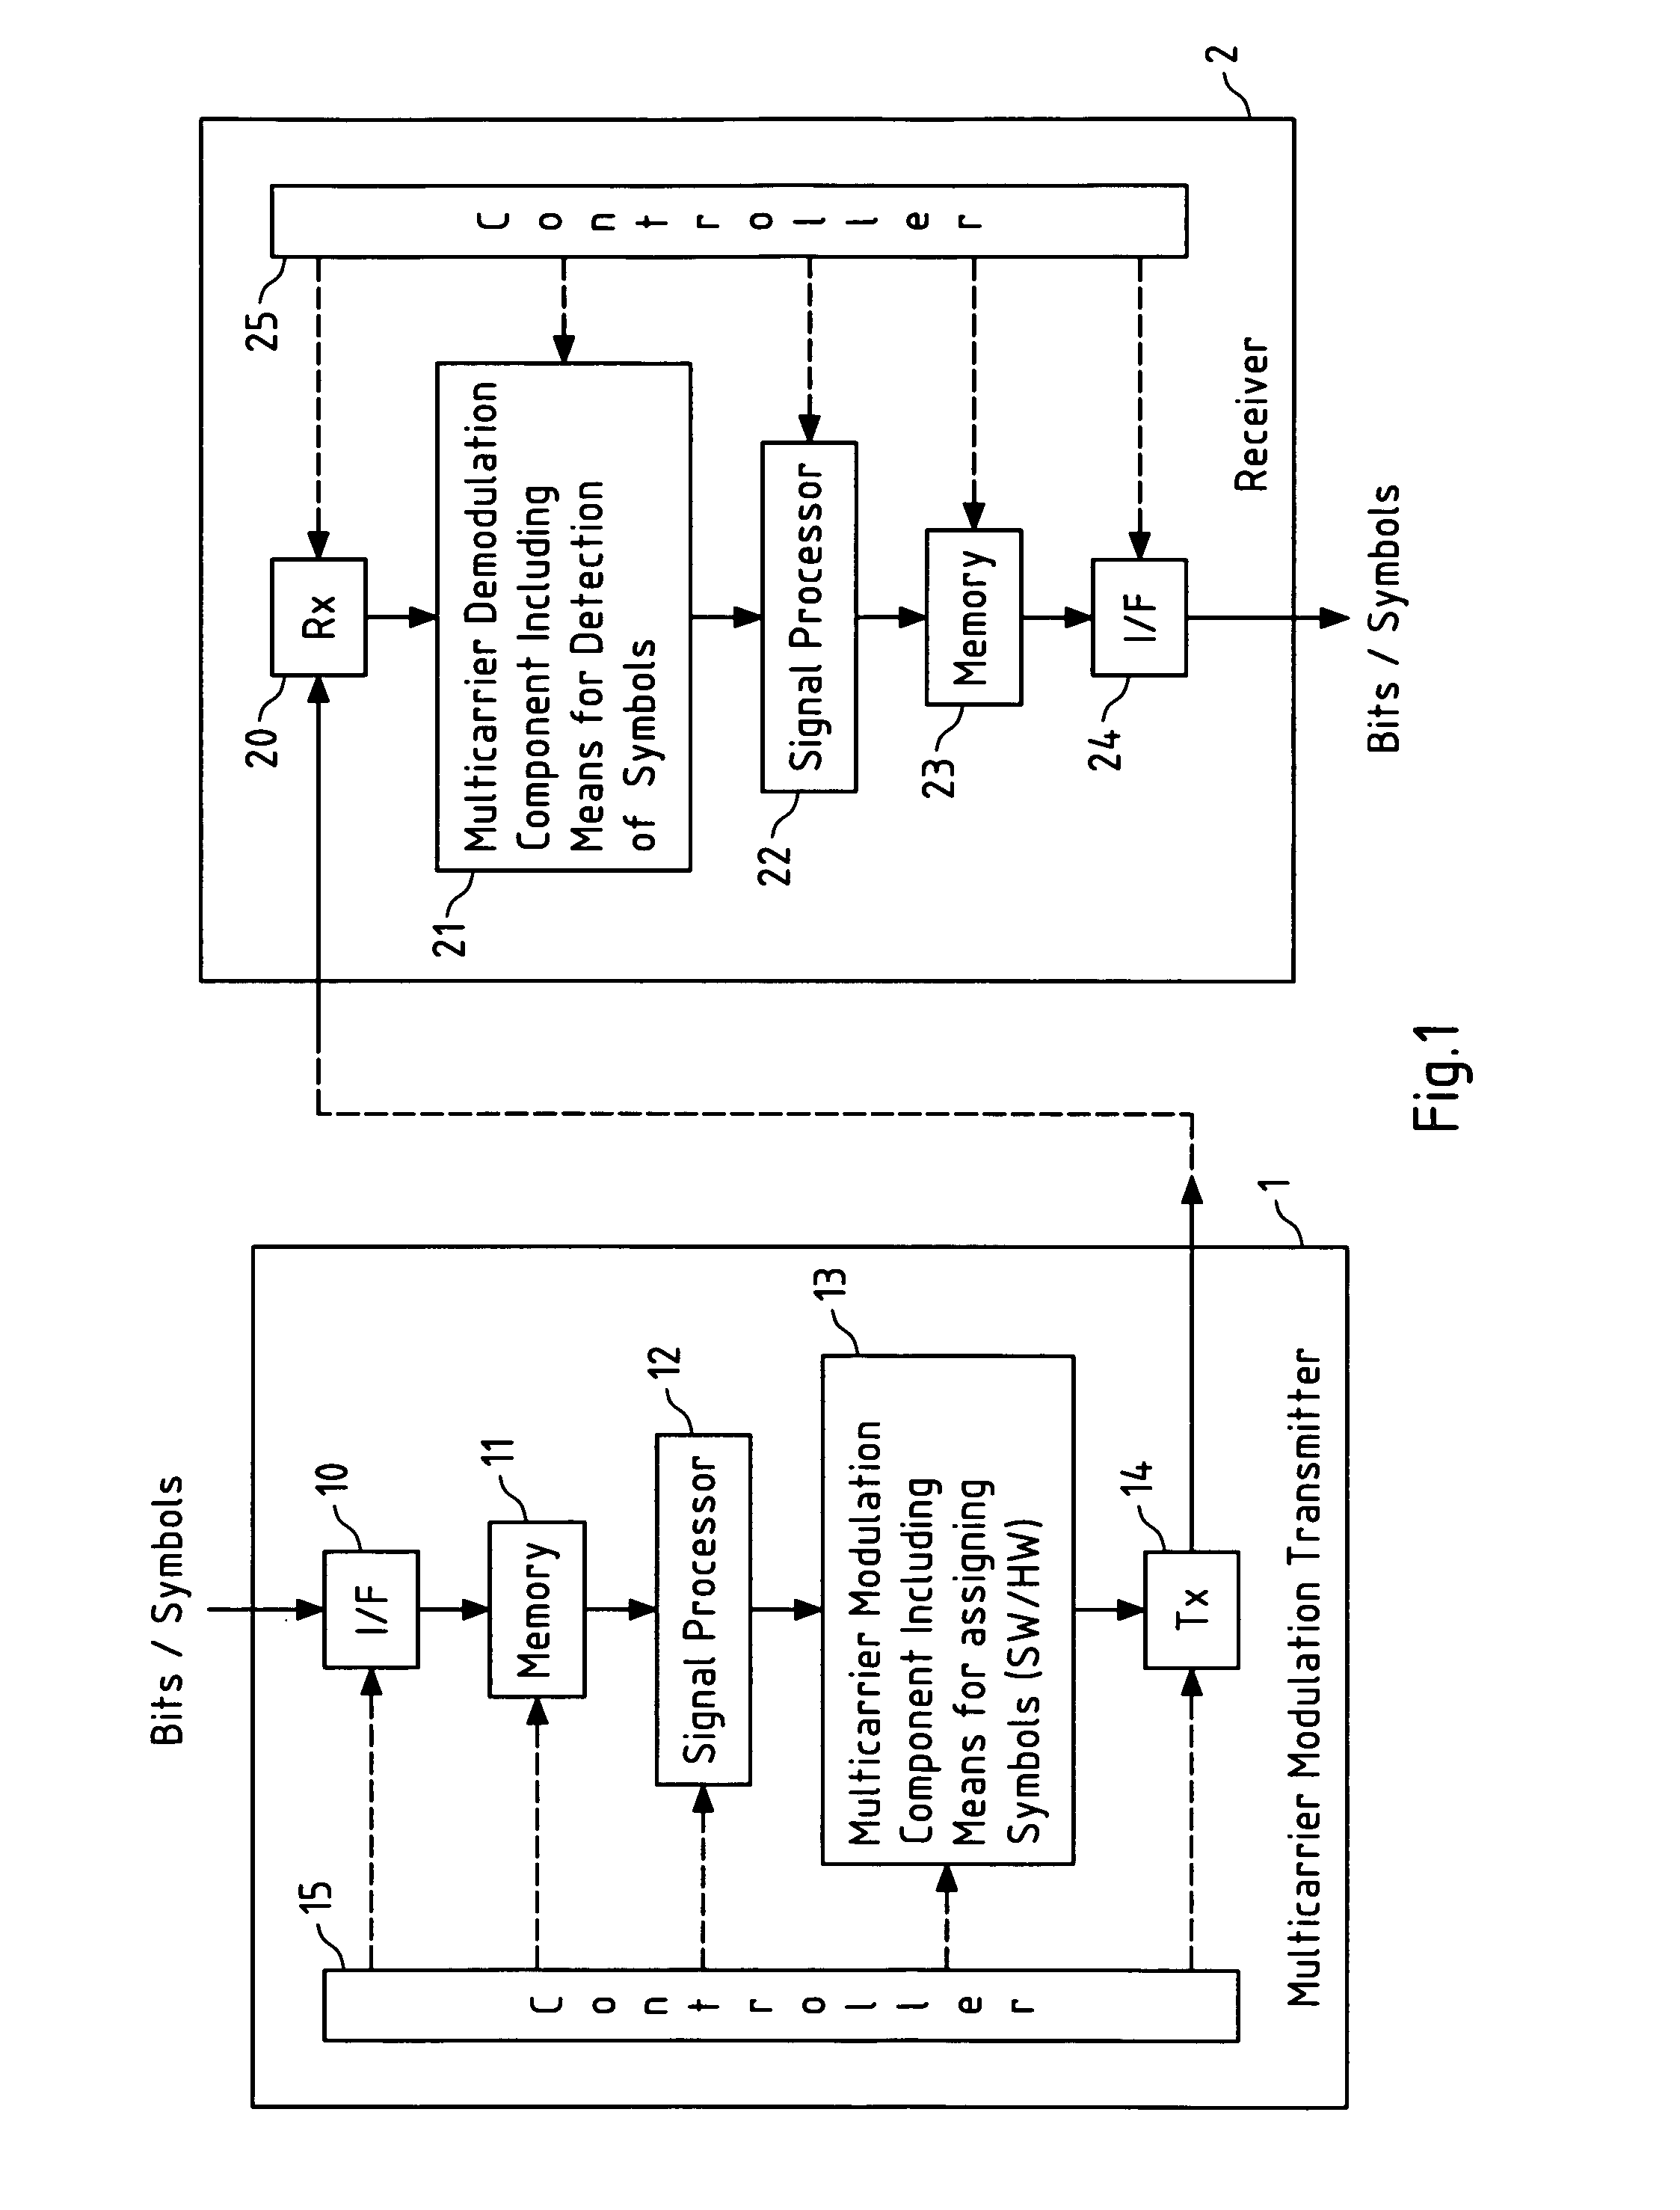 Multicarrier modulation with enhanced frequency coding